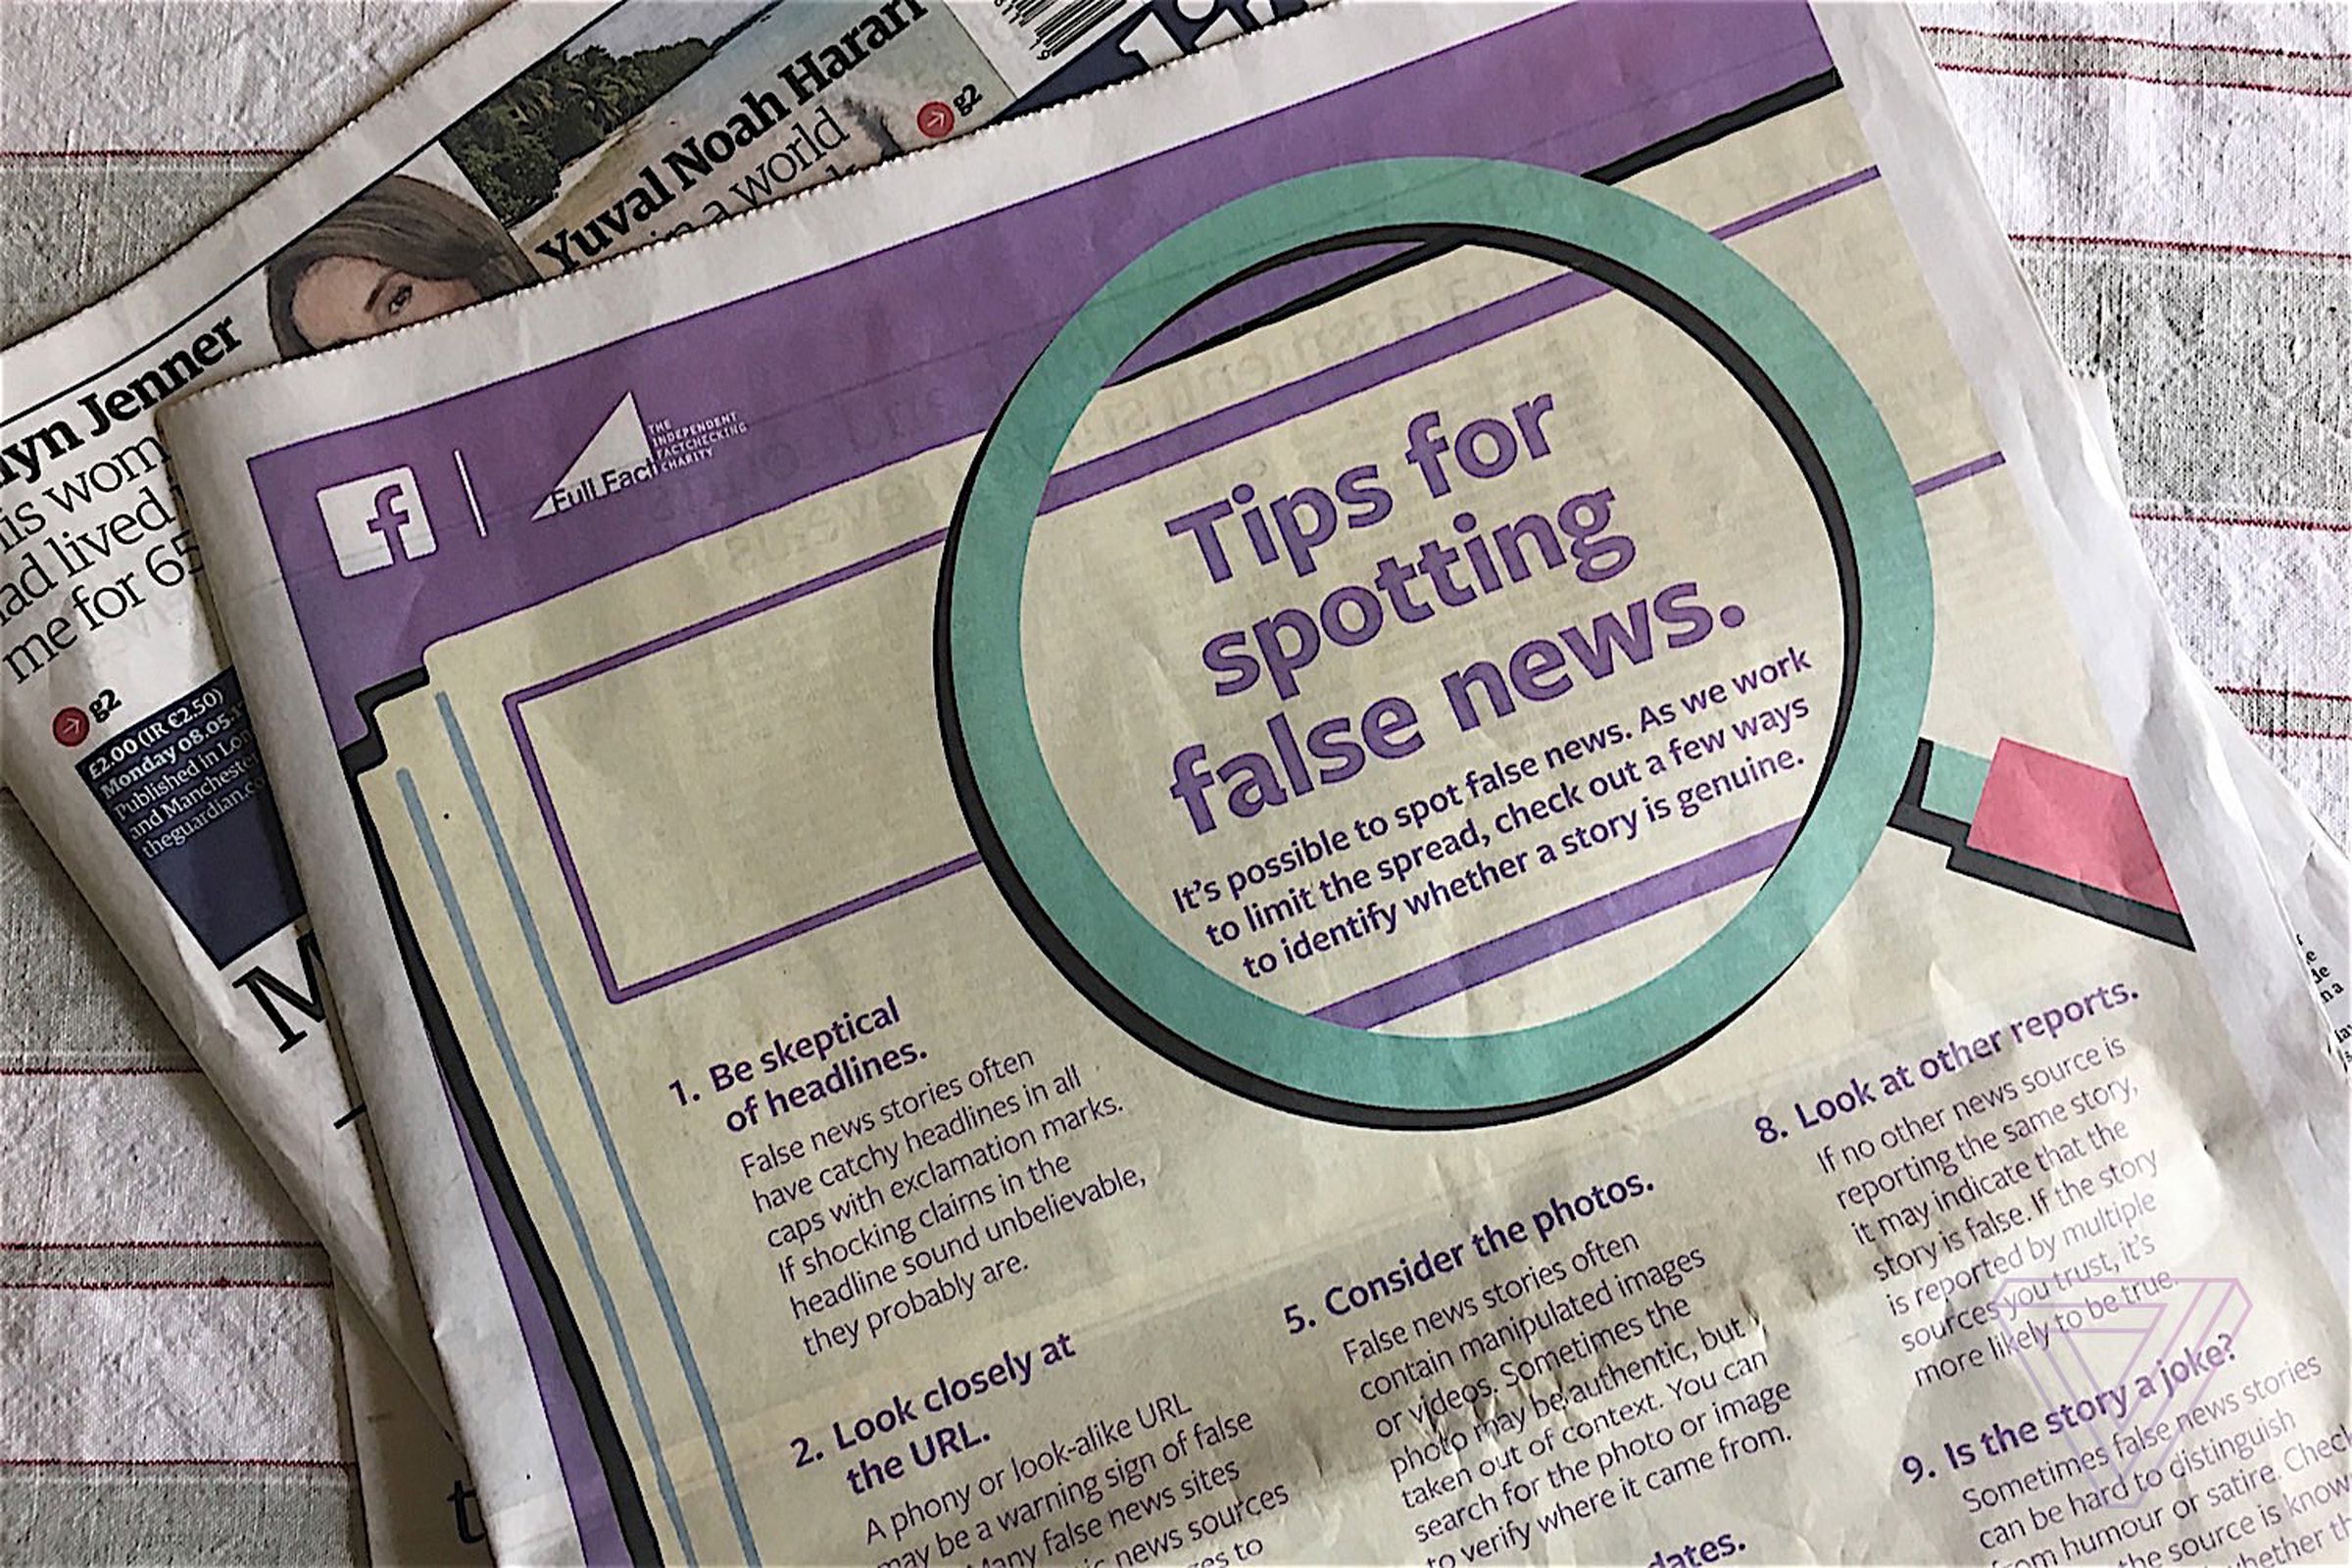 An ad from Facebook and fact-checking charity Full Fact in The Guardian on Monday 8th.